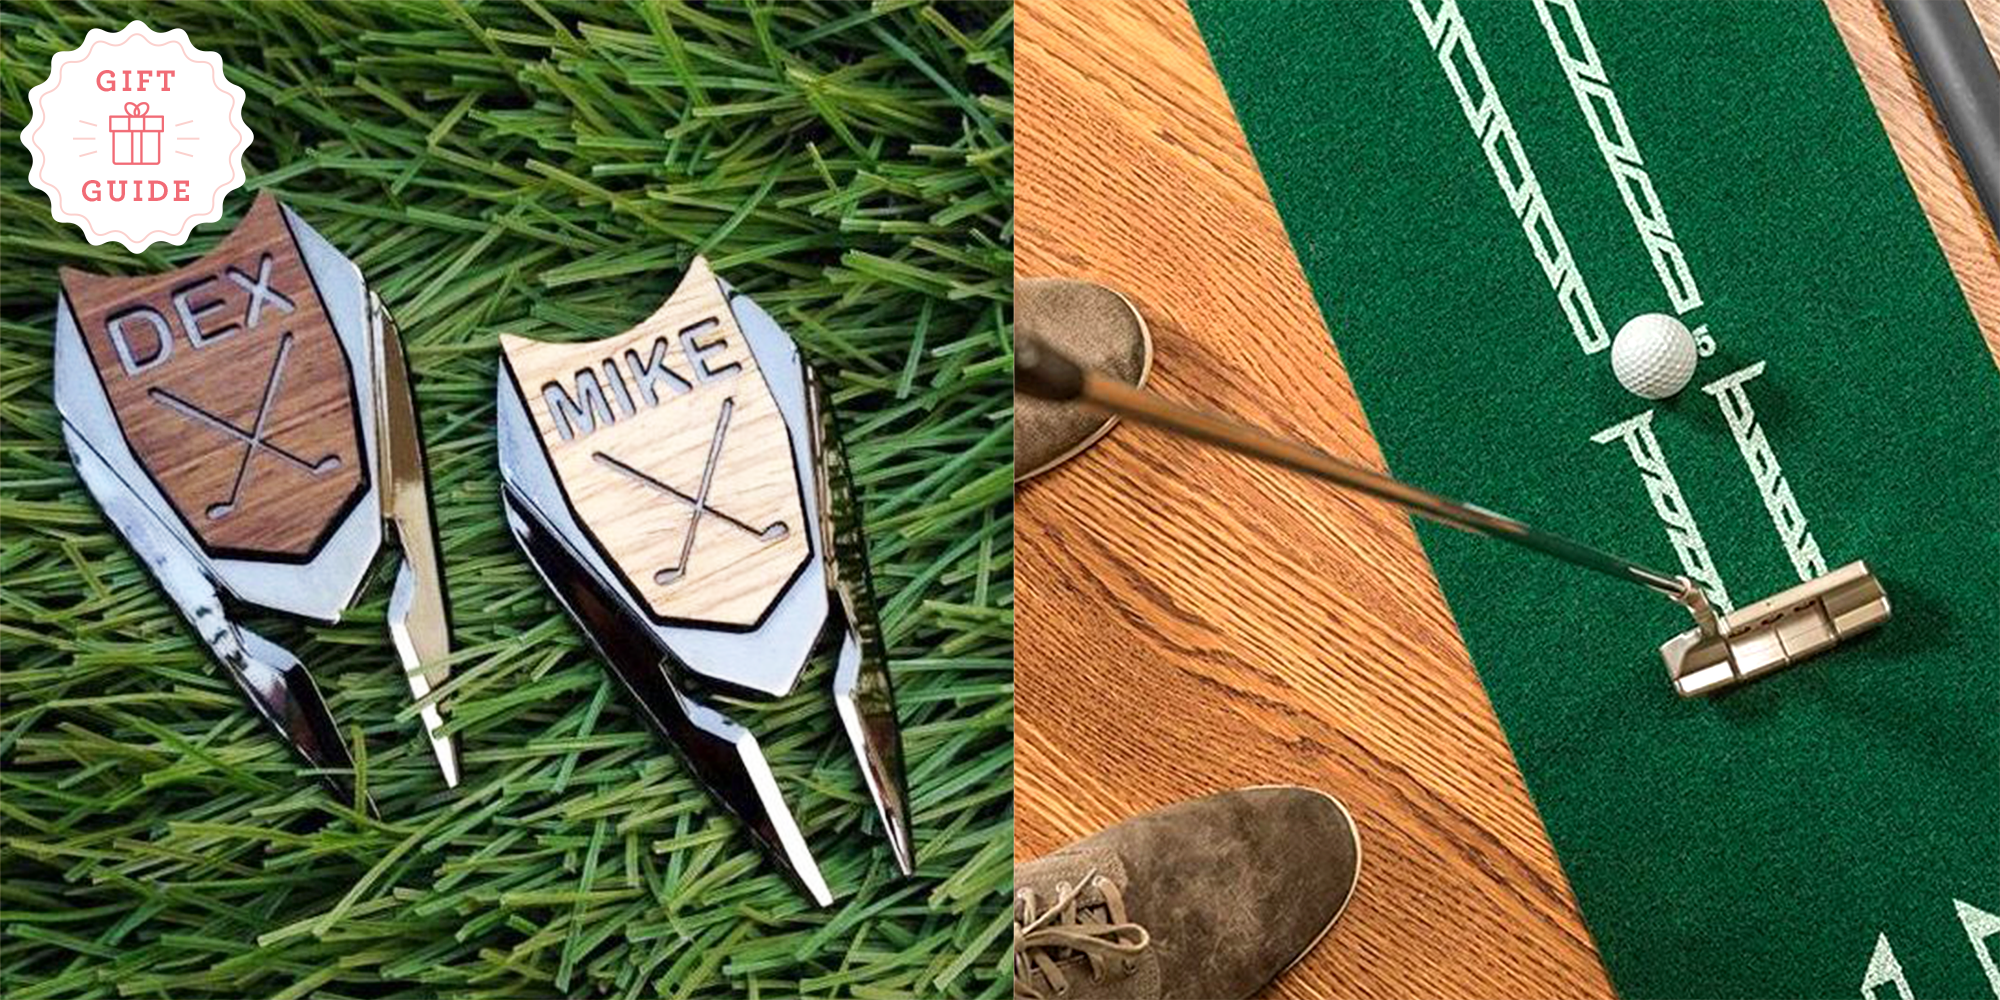 21 Best Golf Gifts for Golfers Who Have Everything » All Gifts Considered